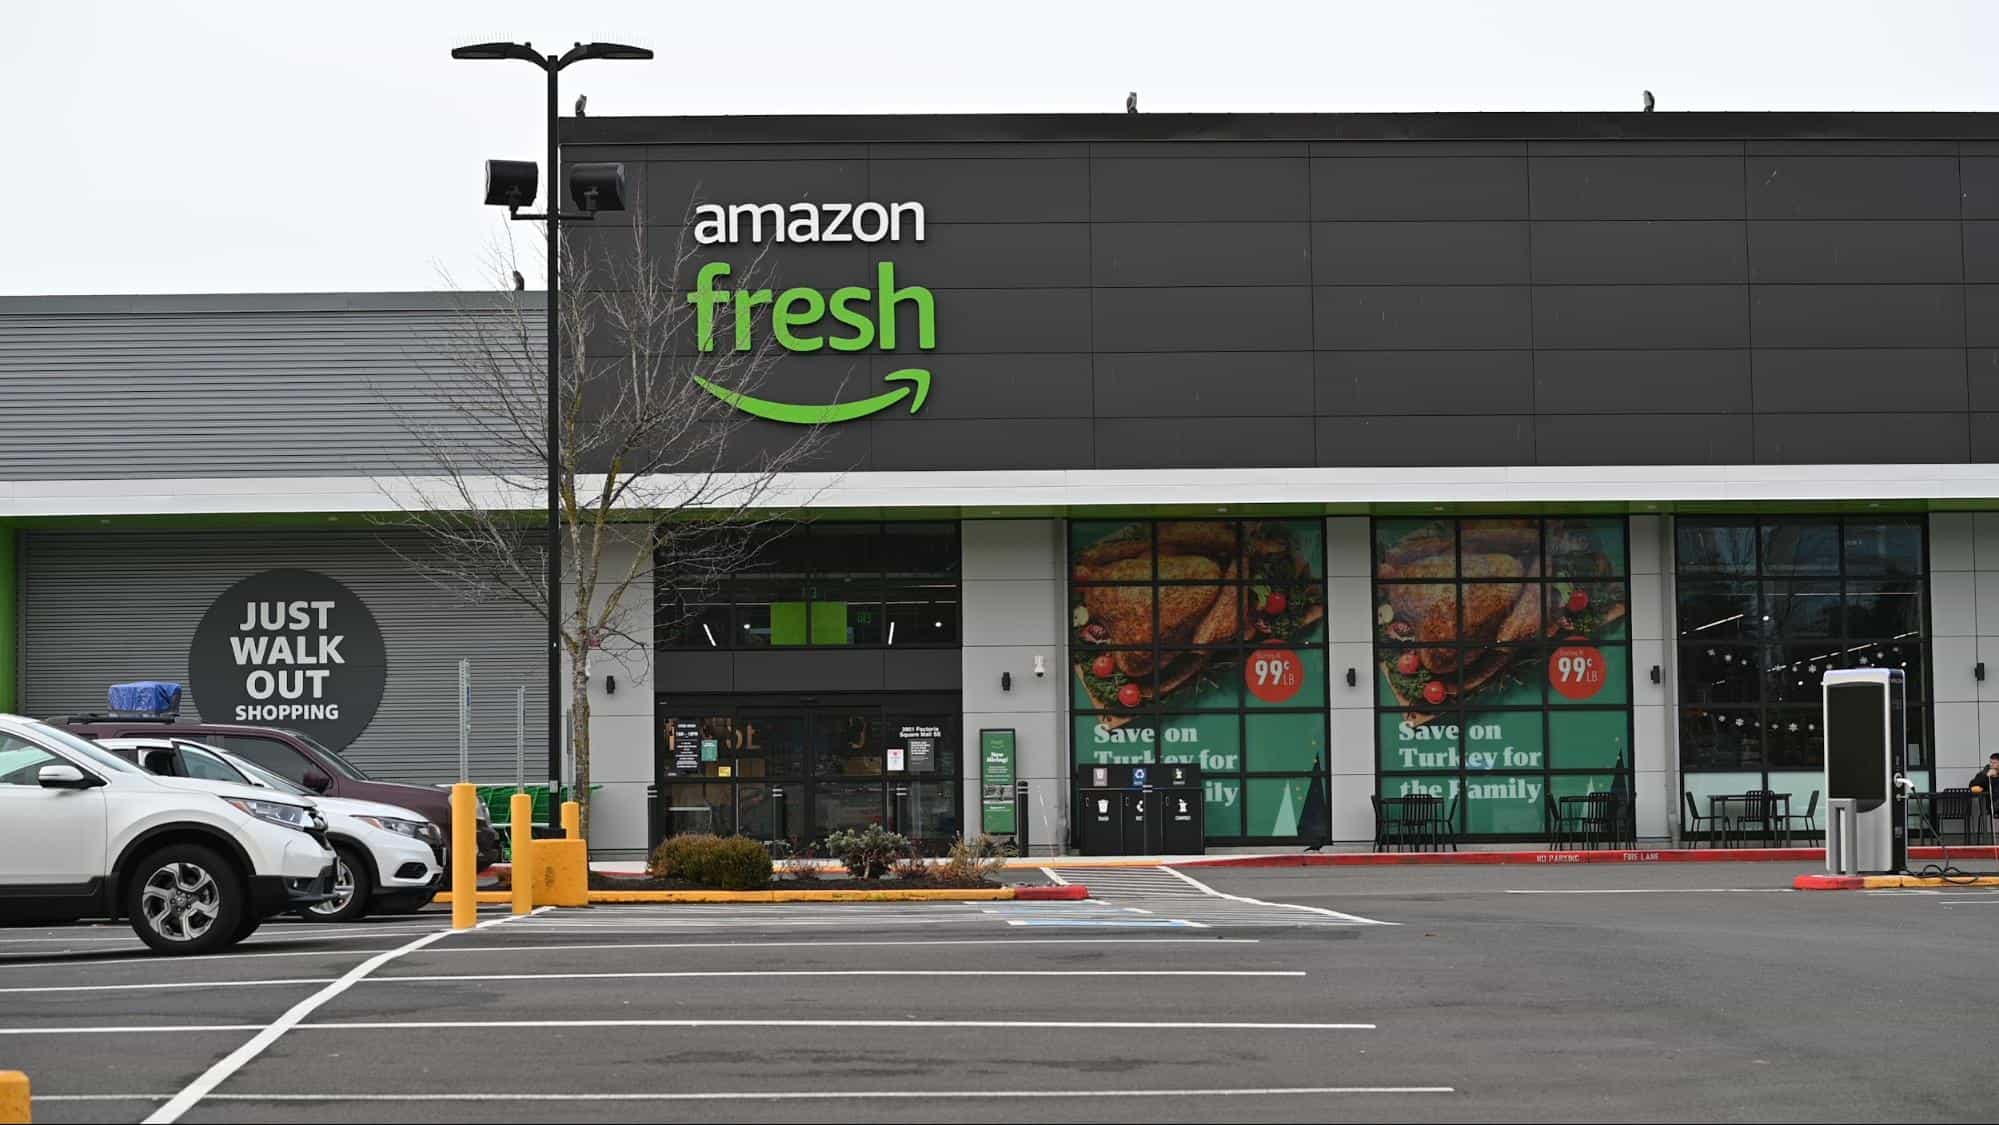 Amazon is Opening Checkout-Less Fresh Stores in the UK